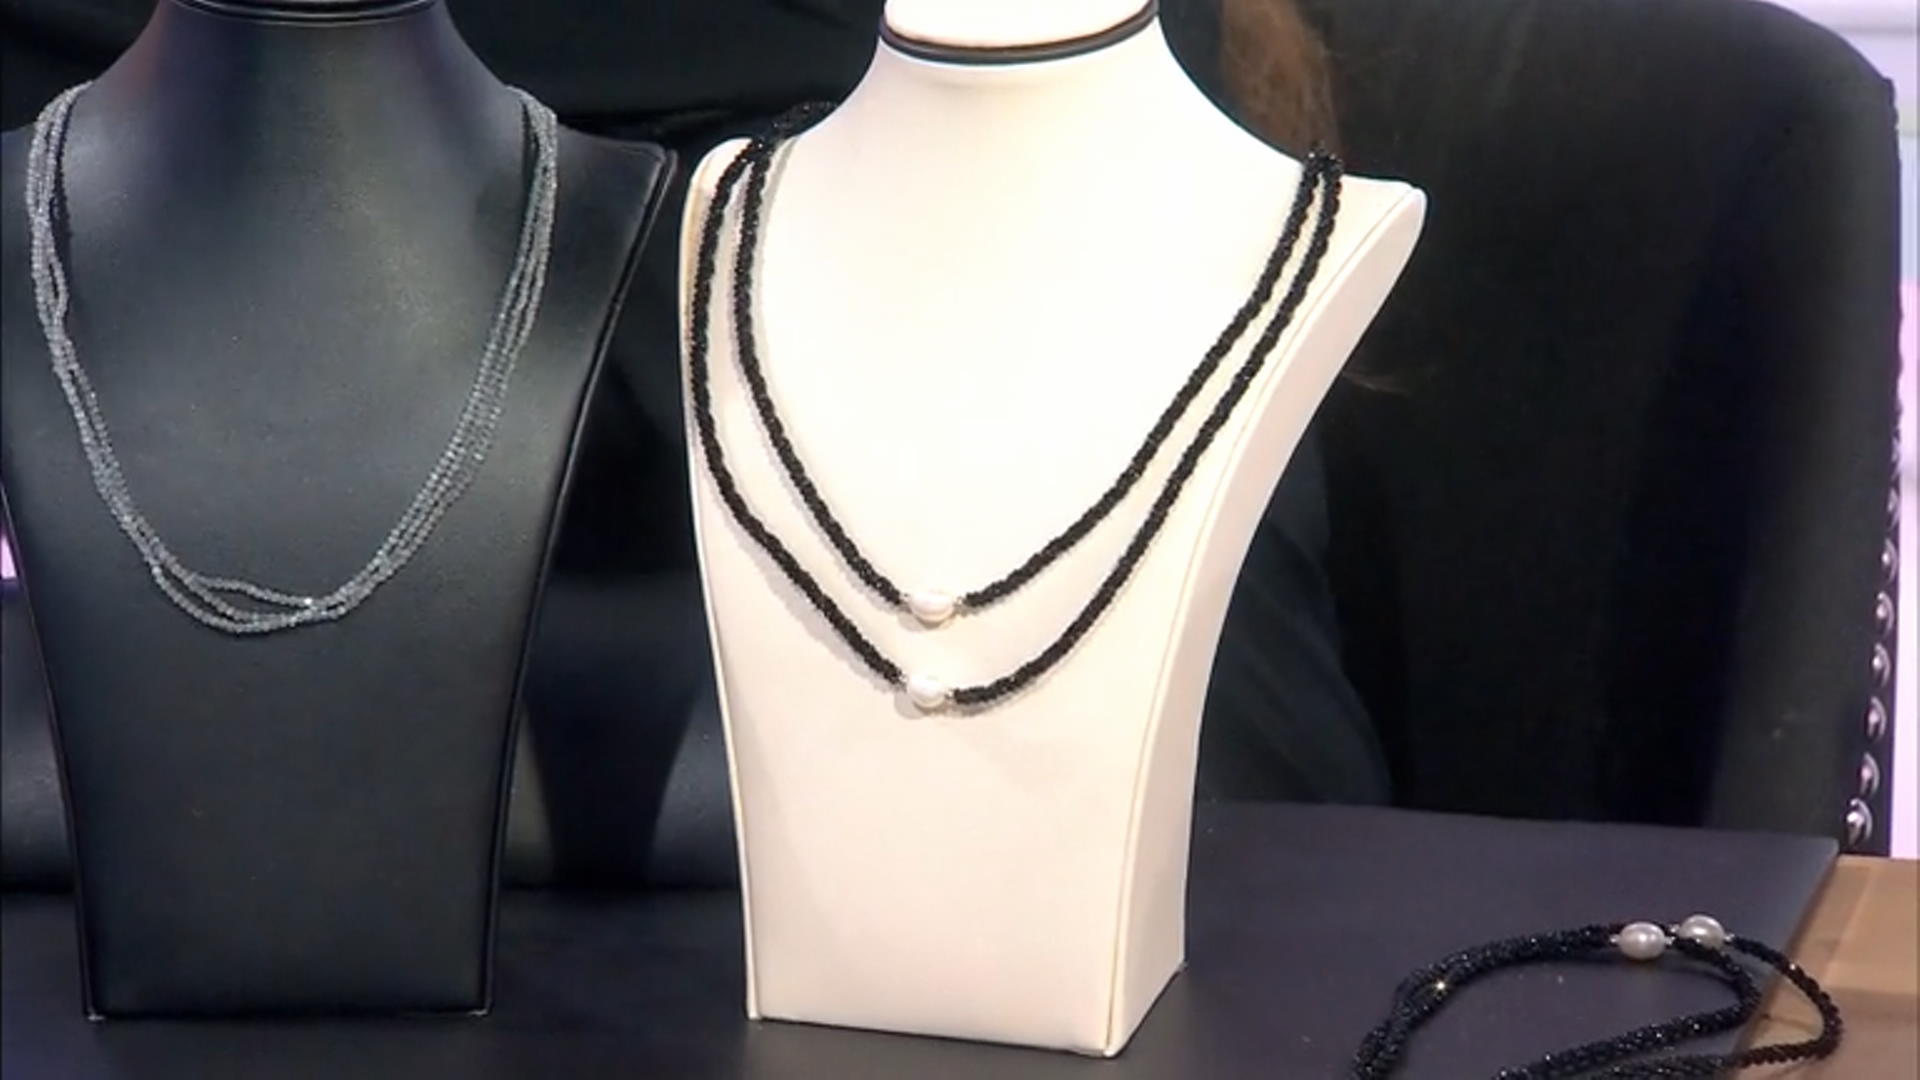 White Cultured Freshwater Pearl Rhodium Over Silver 2-layer Necklace Video Thumbnail